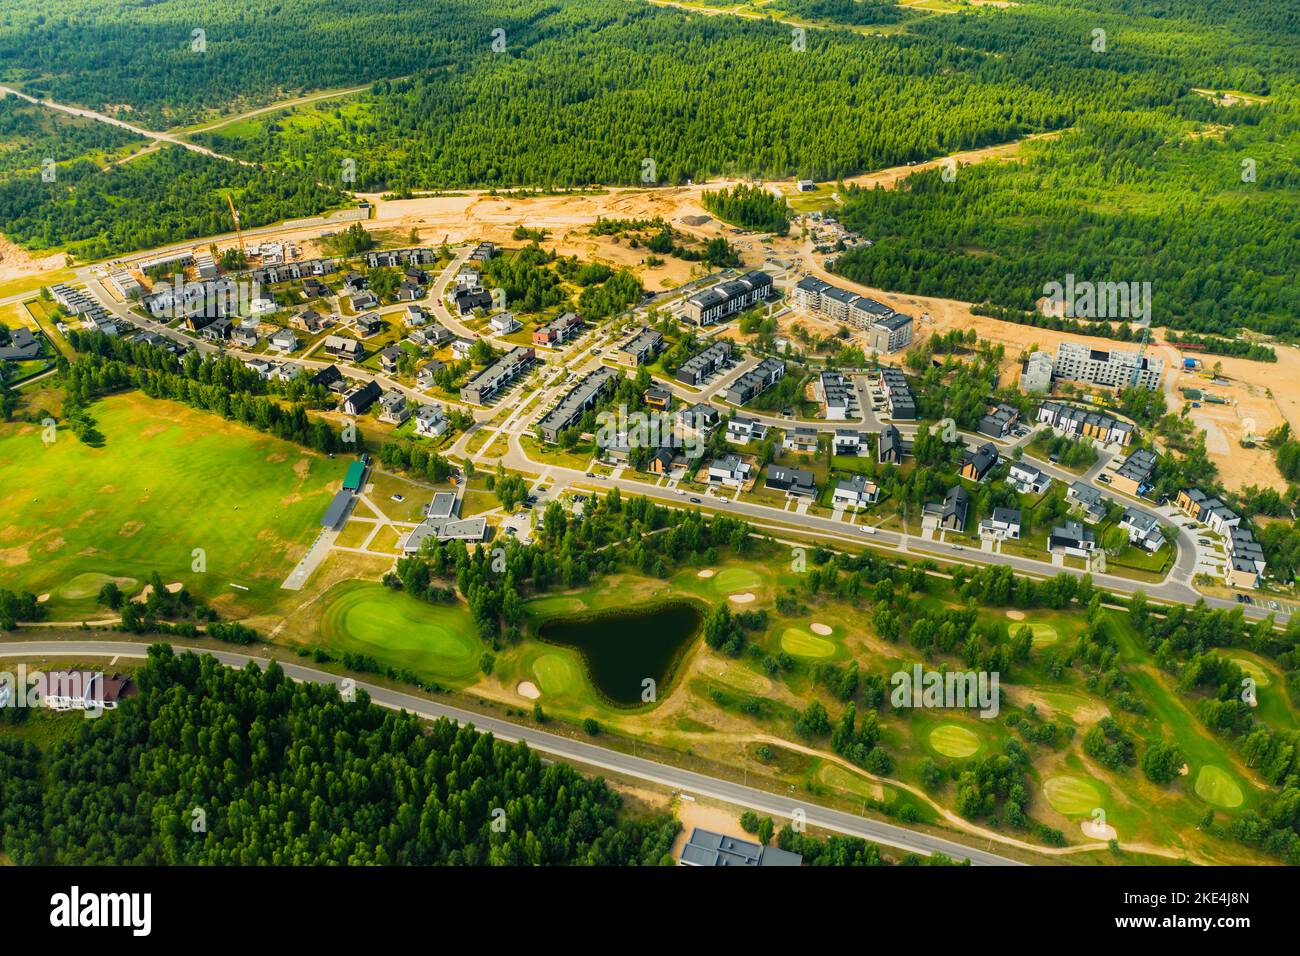 Top view of the golf course located in a wooded area Stock Photo